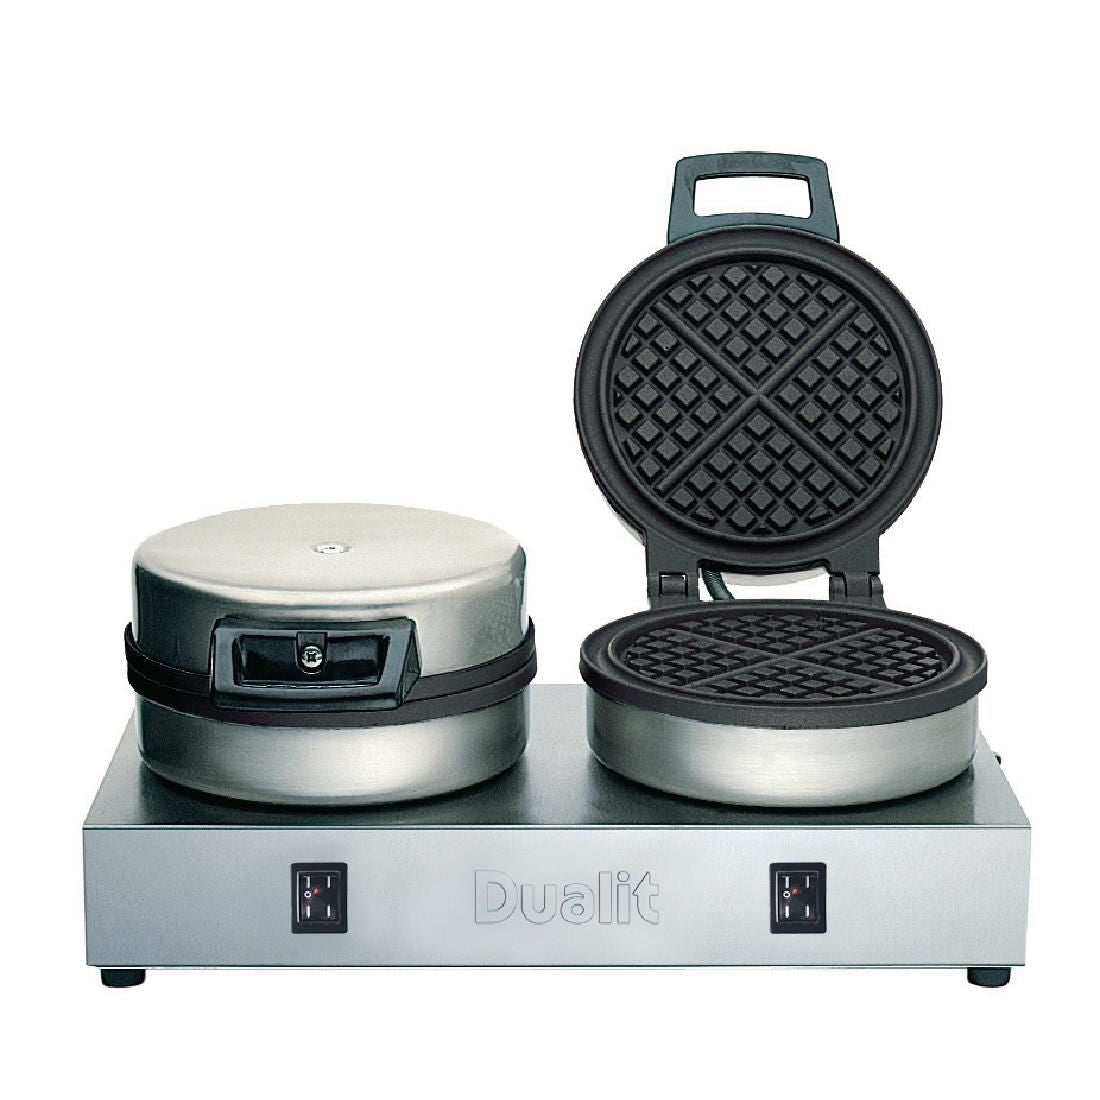 Dualit Double Waffle Iron 74002 J449 JD Catering Equipment Solutions Ltd